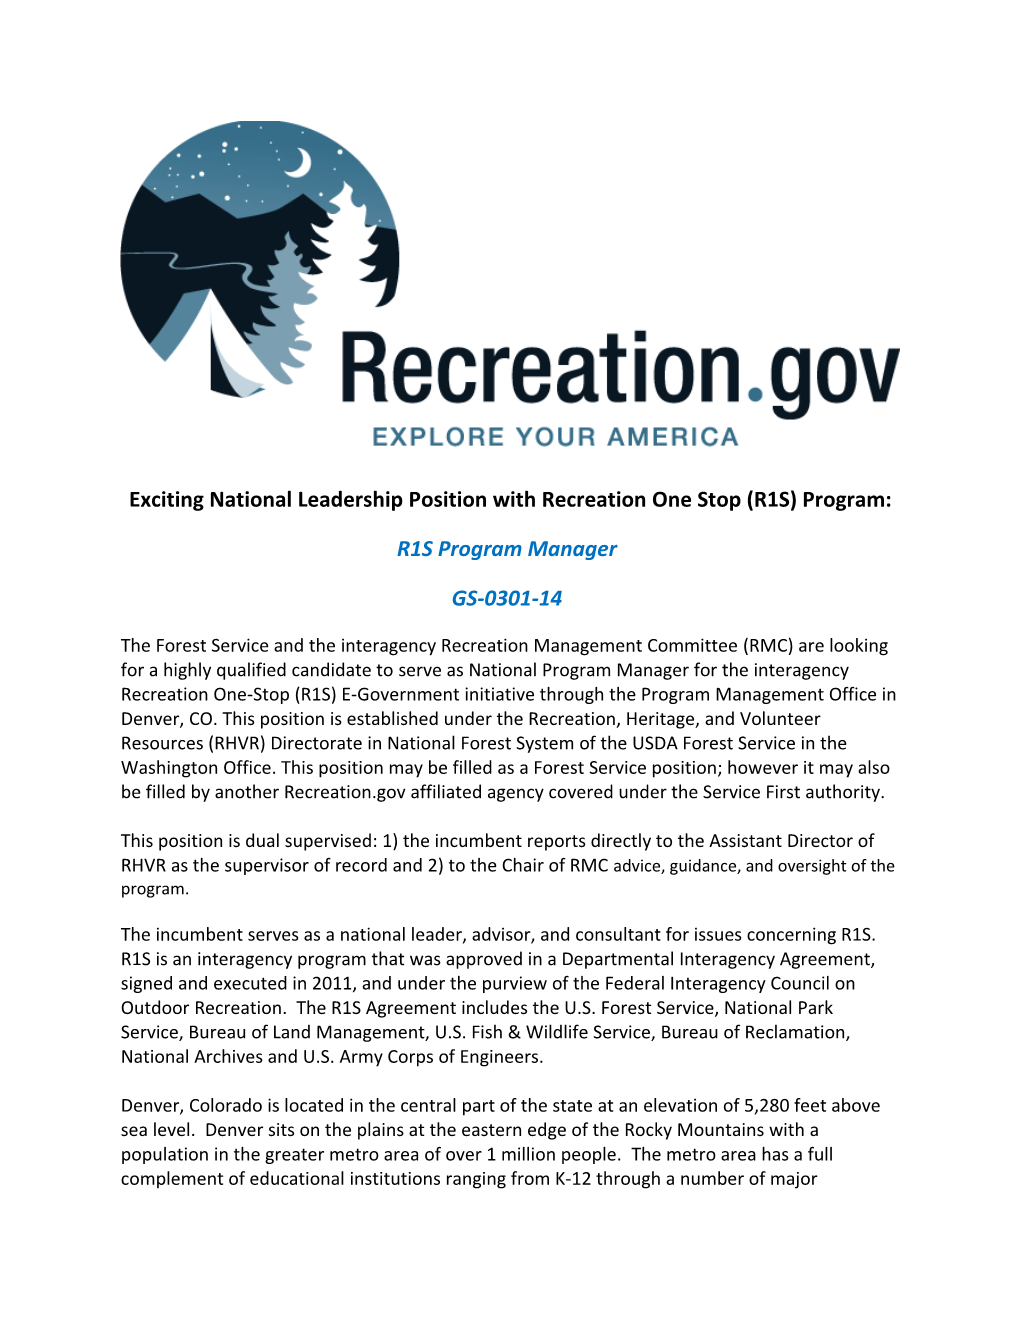 Exciting National Leadership Position with Recreation One Stop (R1S) Program